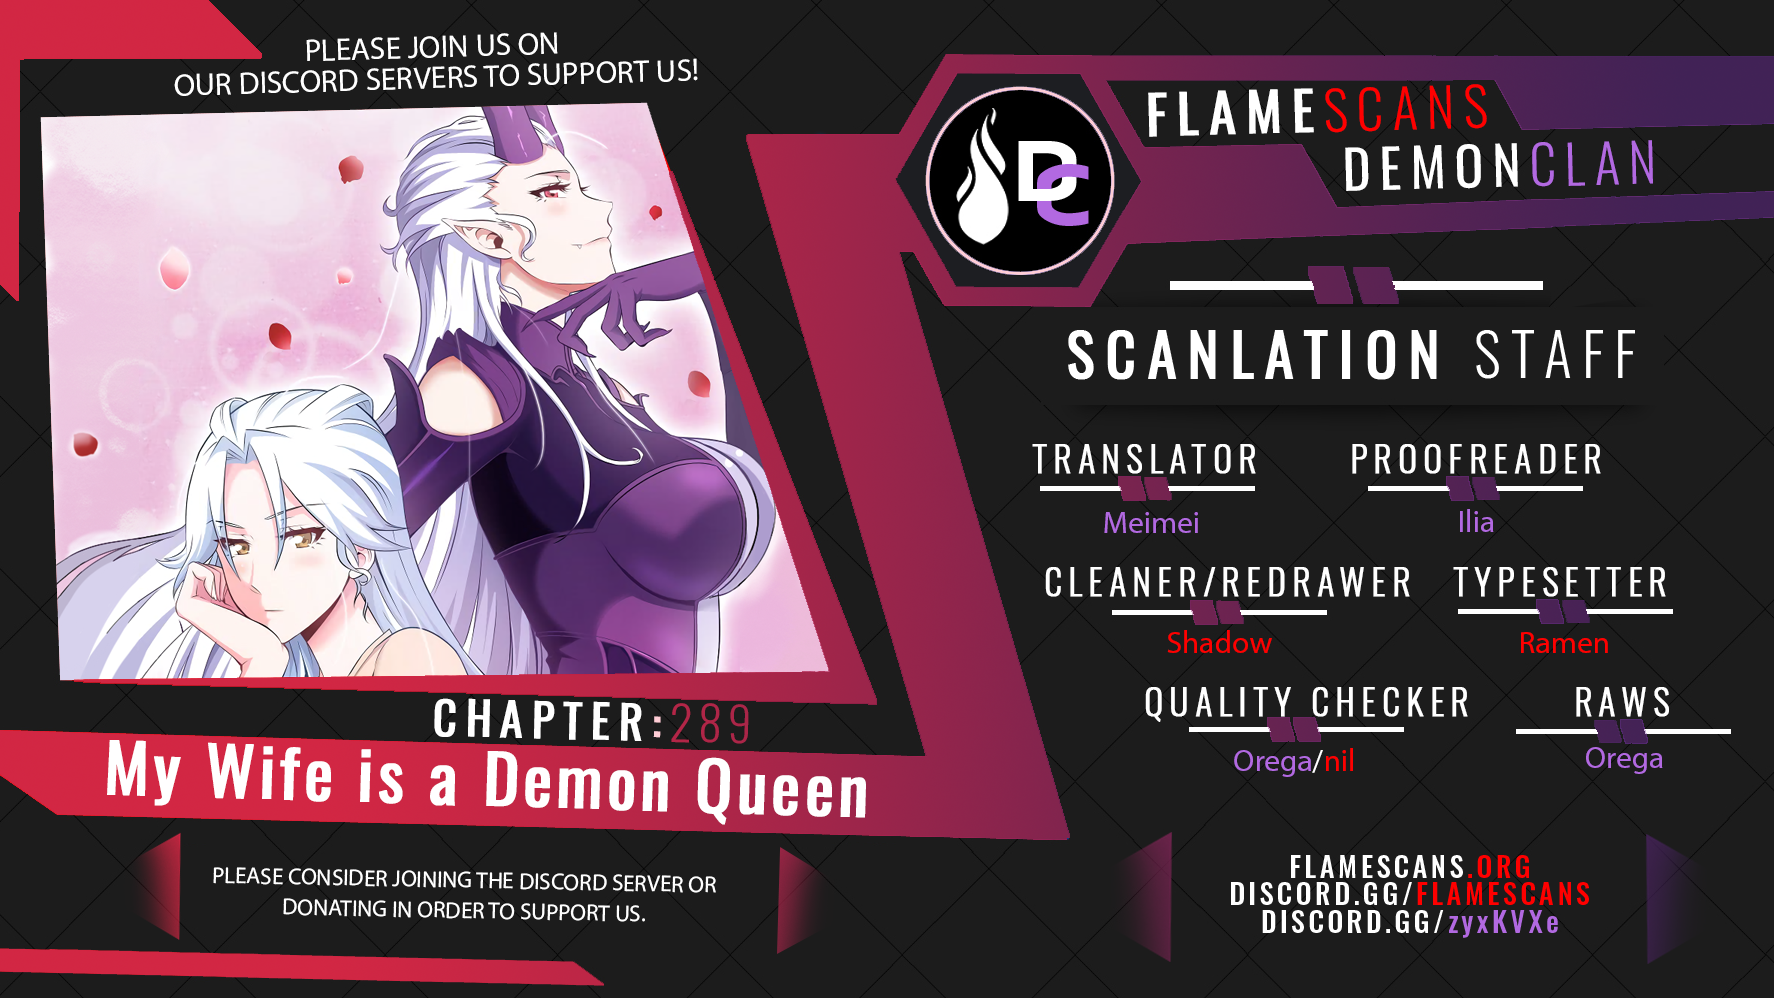 My Wife is a Demon Queen - Chapter 9615 - Image 1